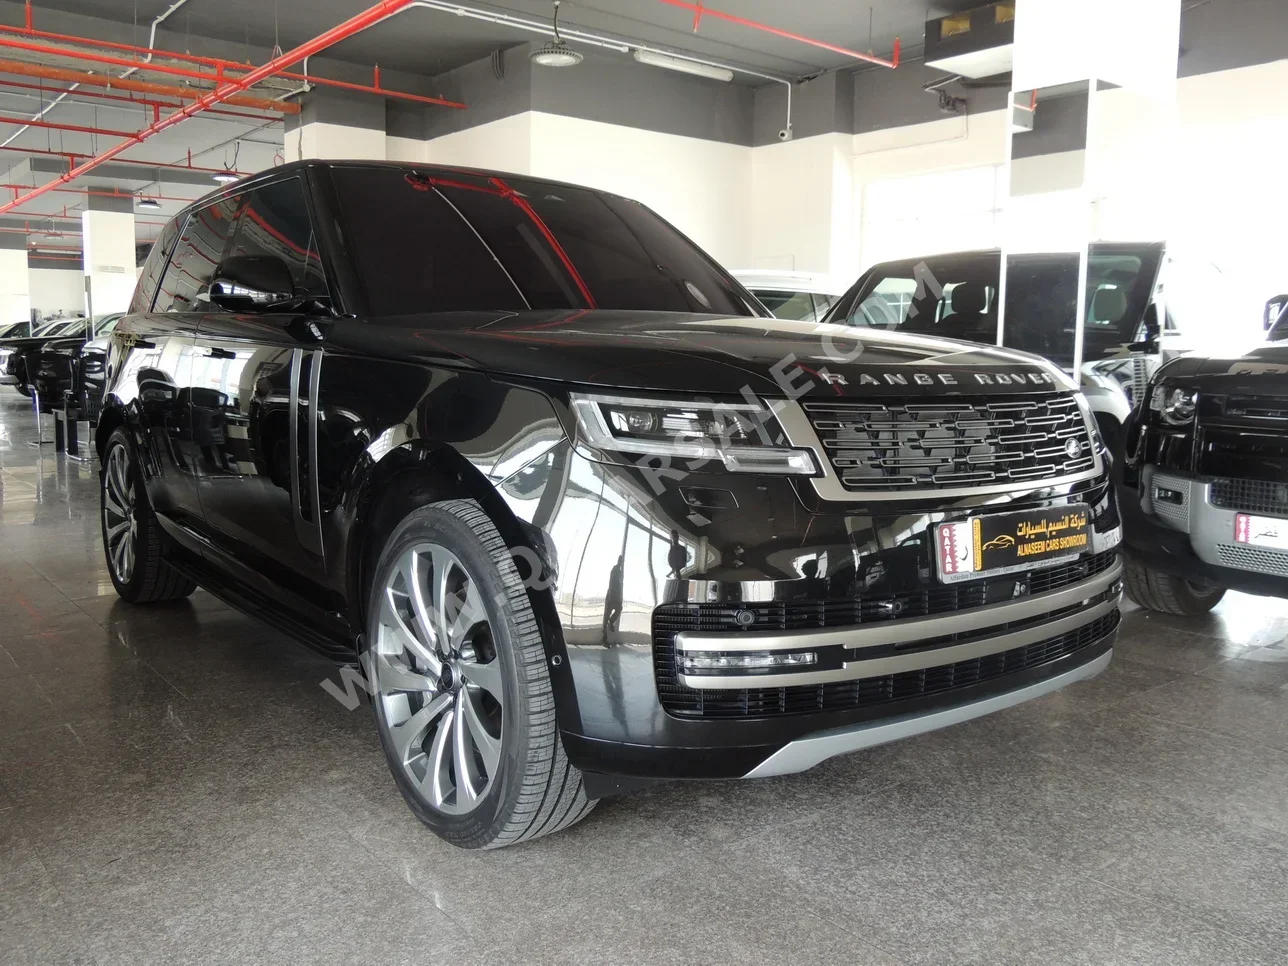 Land Rover  Range Rover  HSE  2023  Automatic  8,000 Km  8 Cylinder  Four Wheel Drive (4WD)  SUV  Black  With Warranty